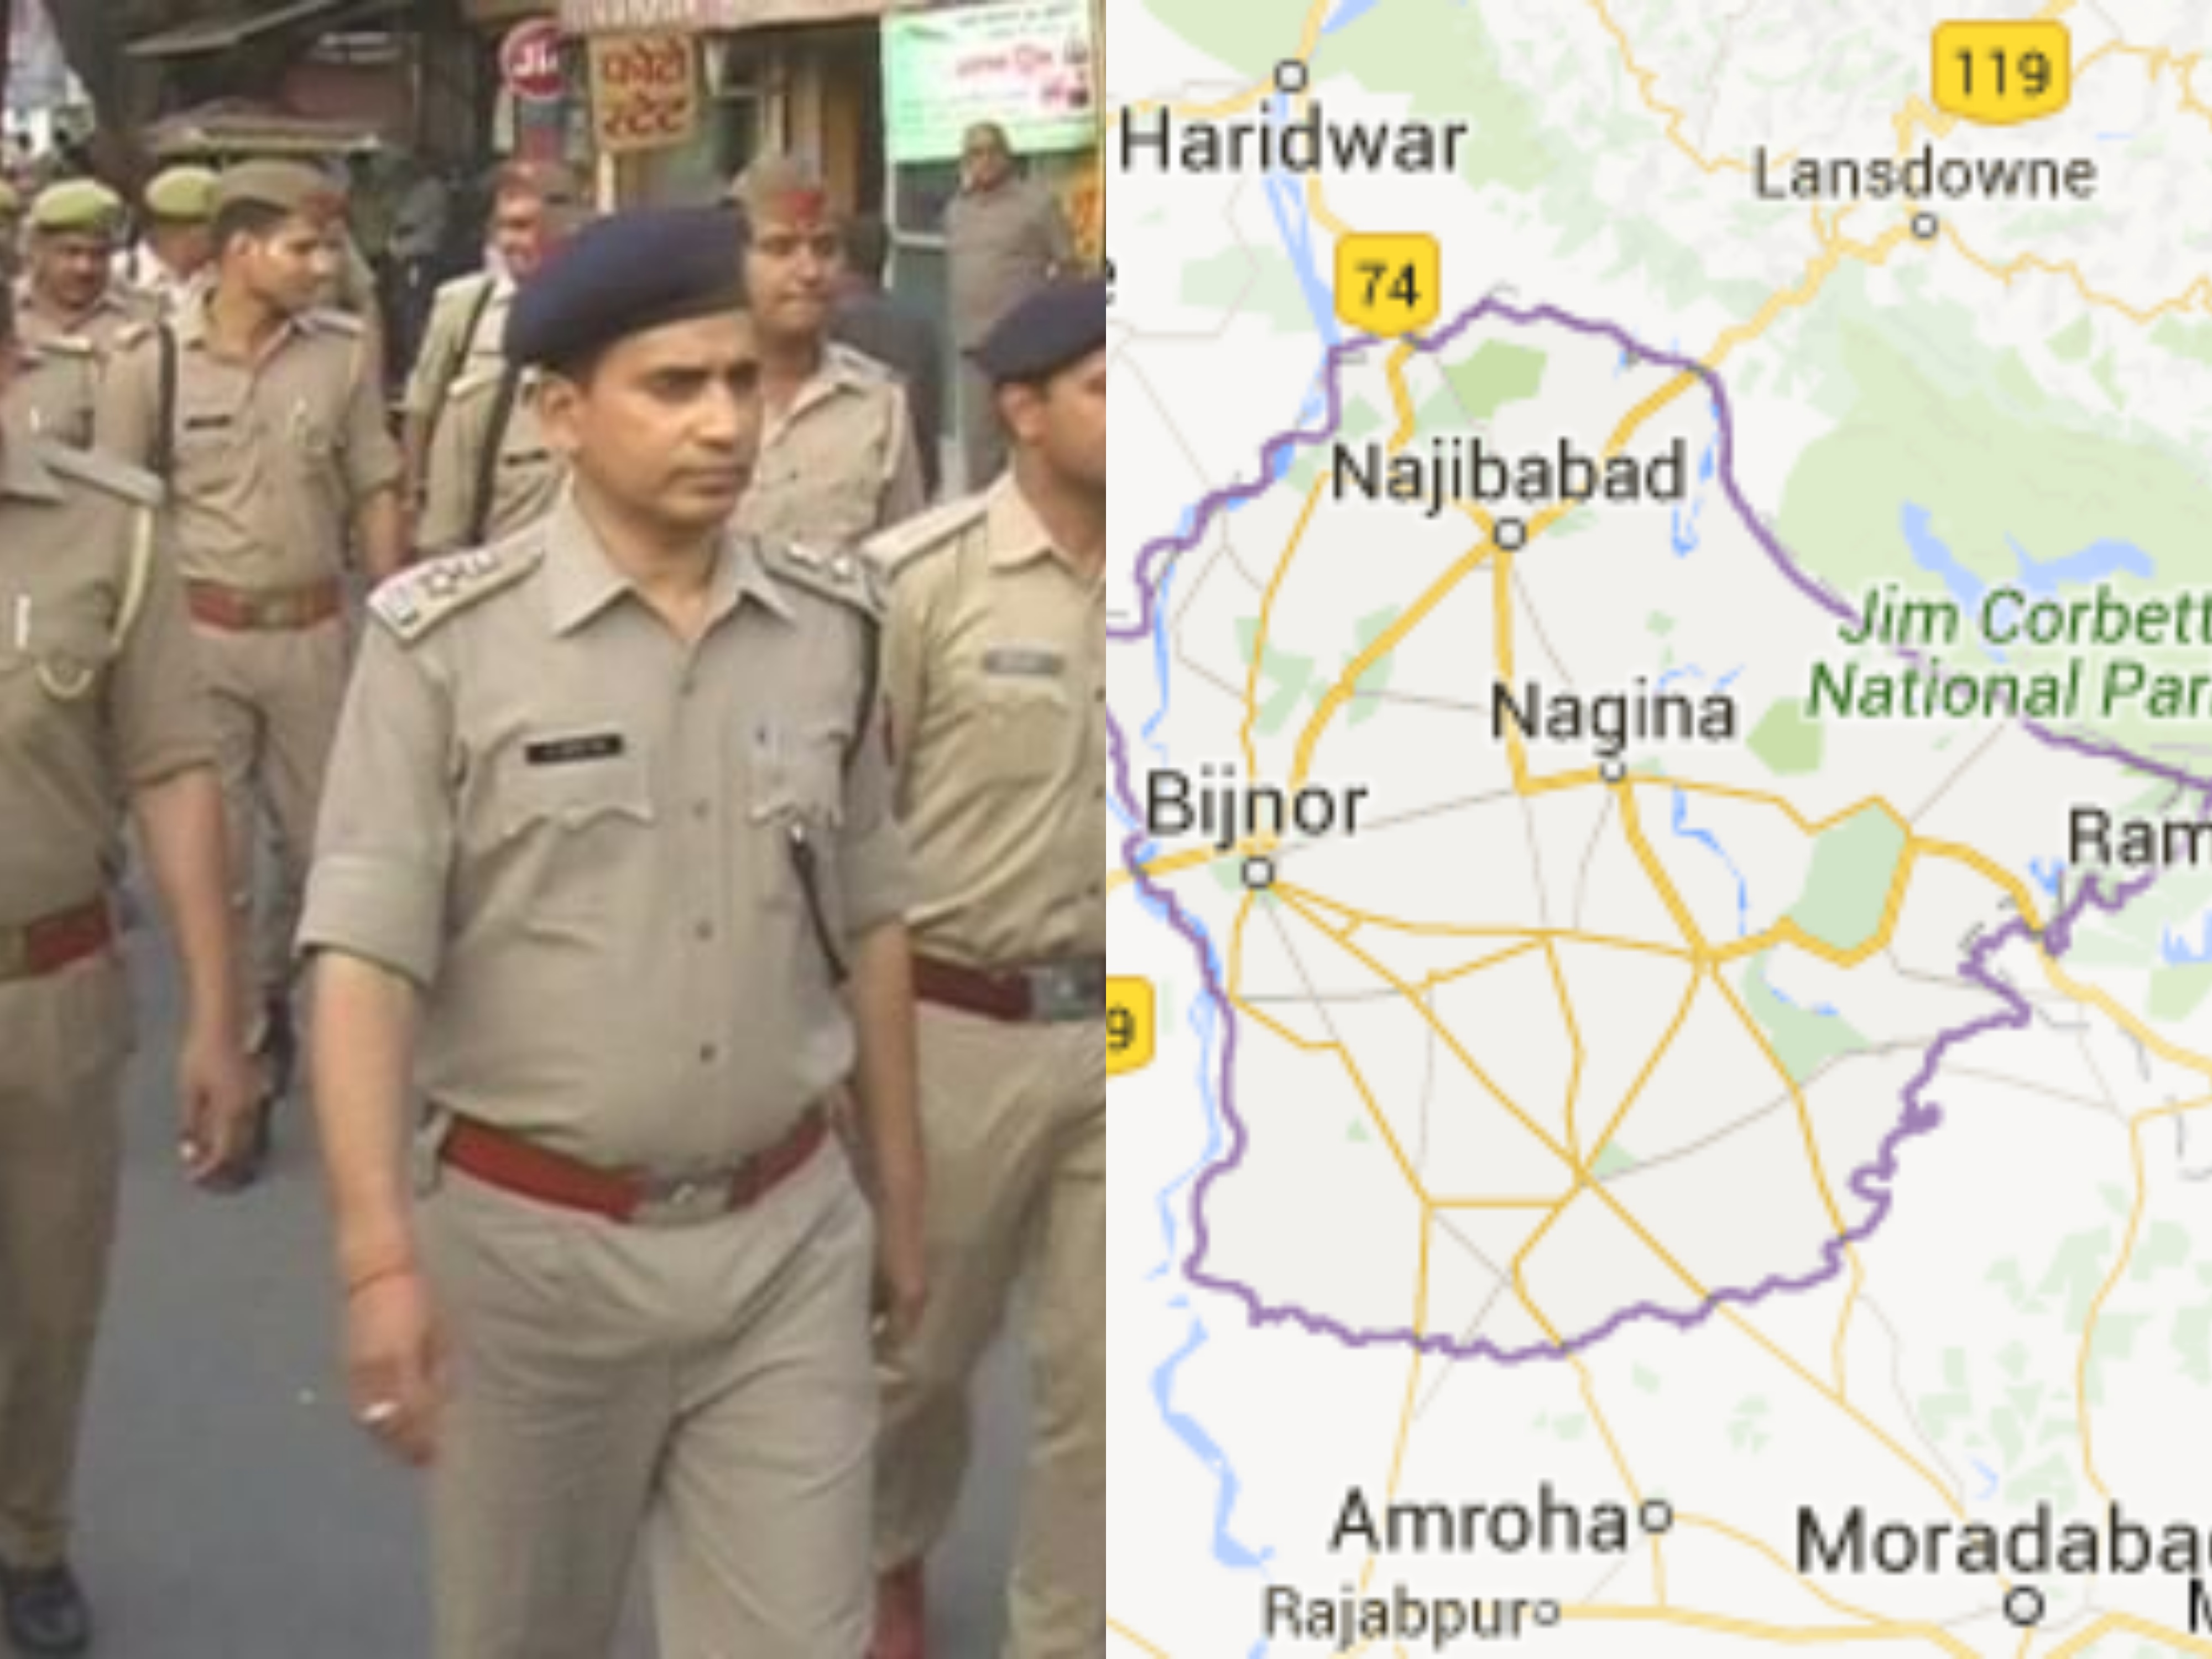 Bijnor City Police catches prisoners who fleed from temporary jail